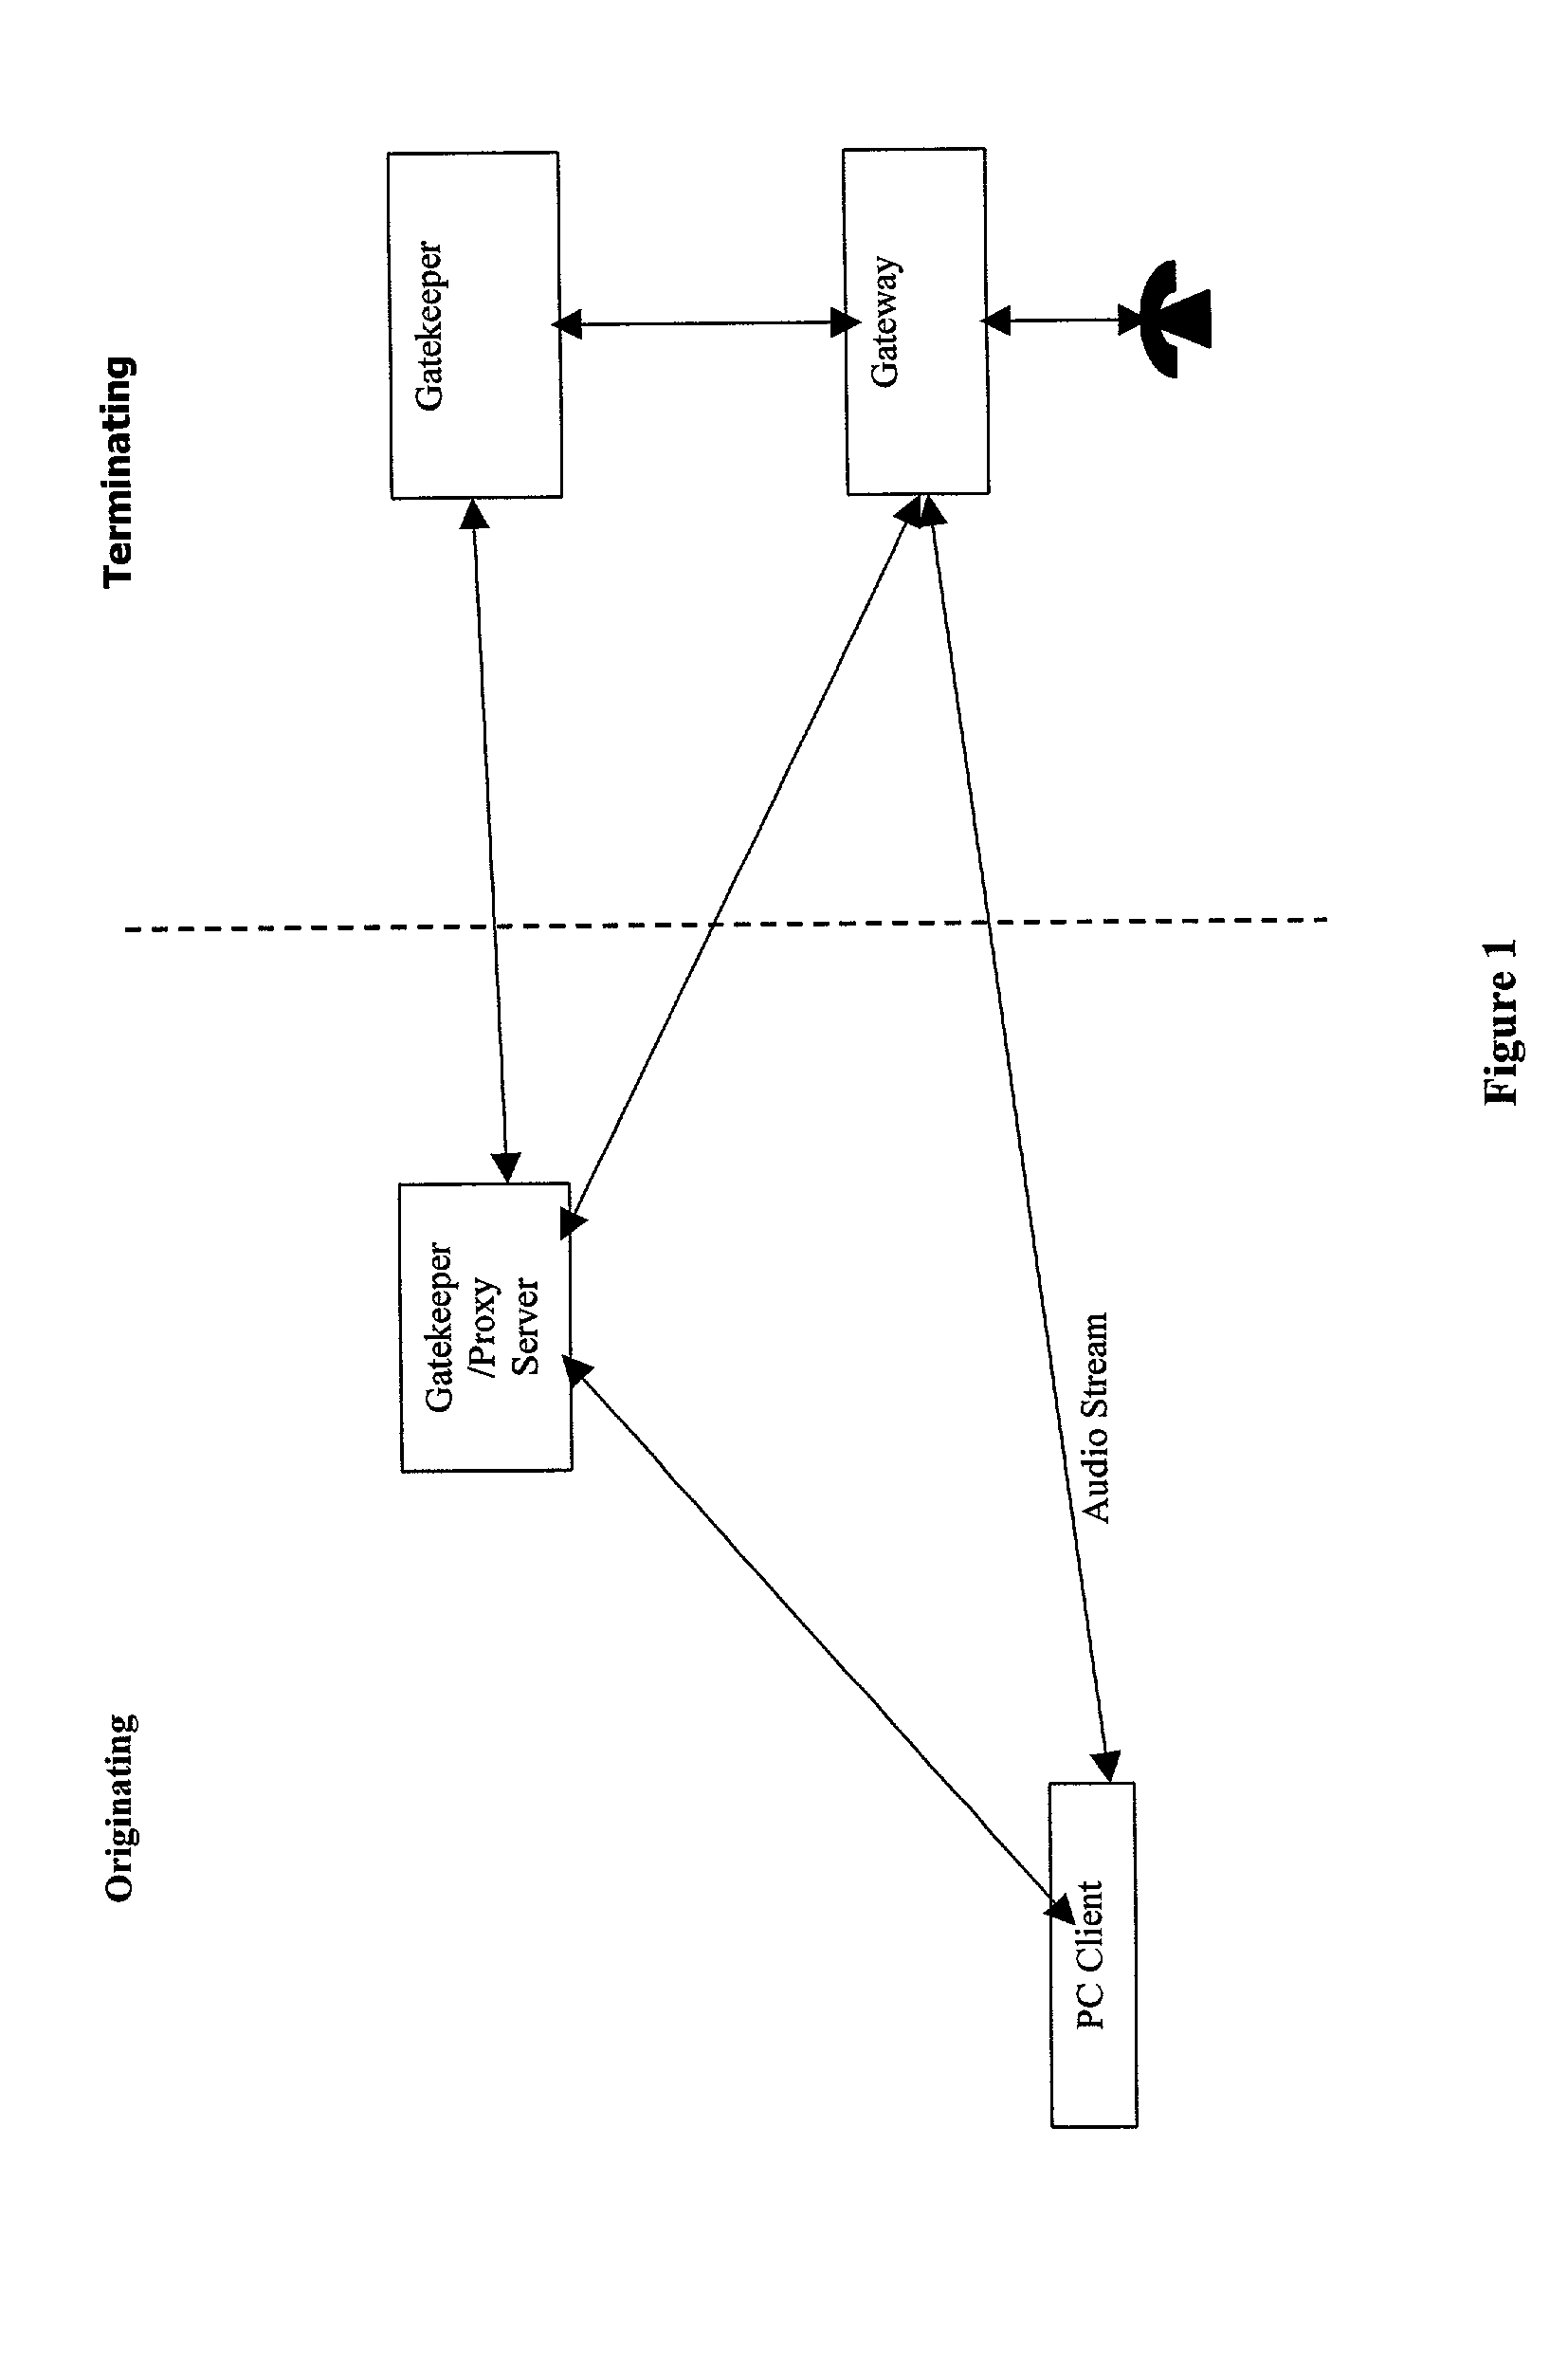 Quality of transmission across packet-based networks